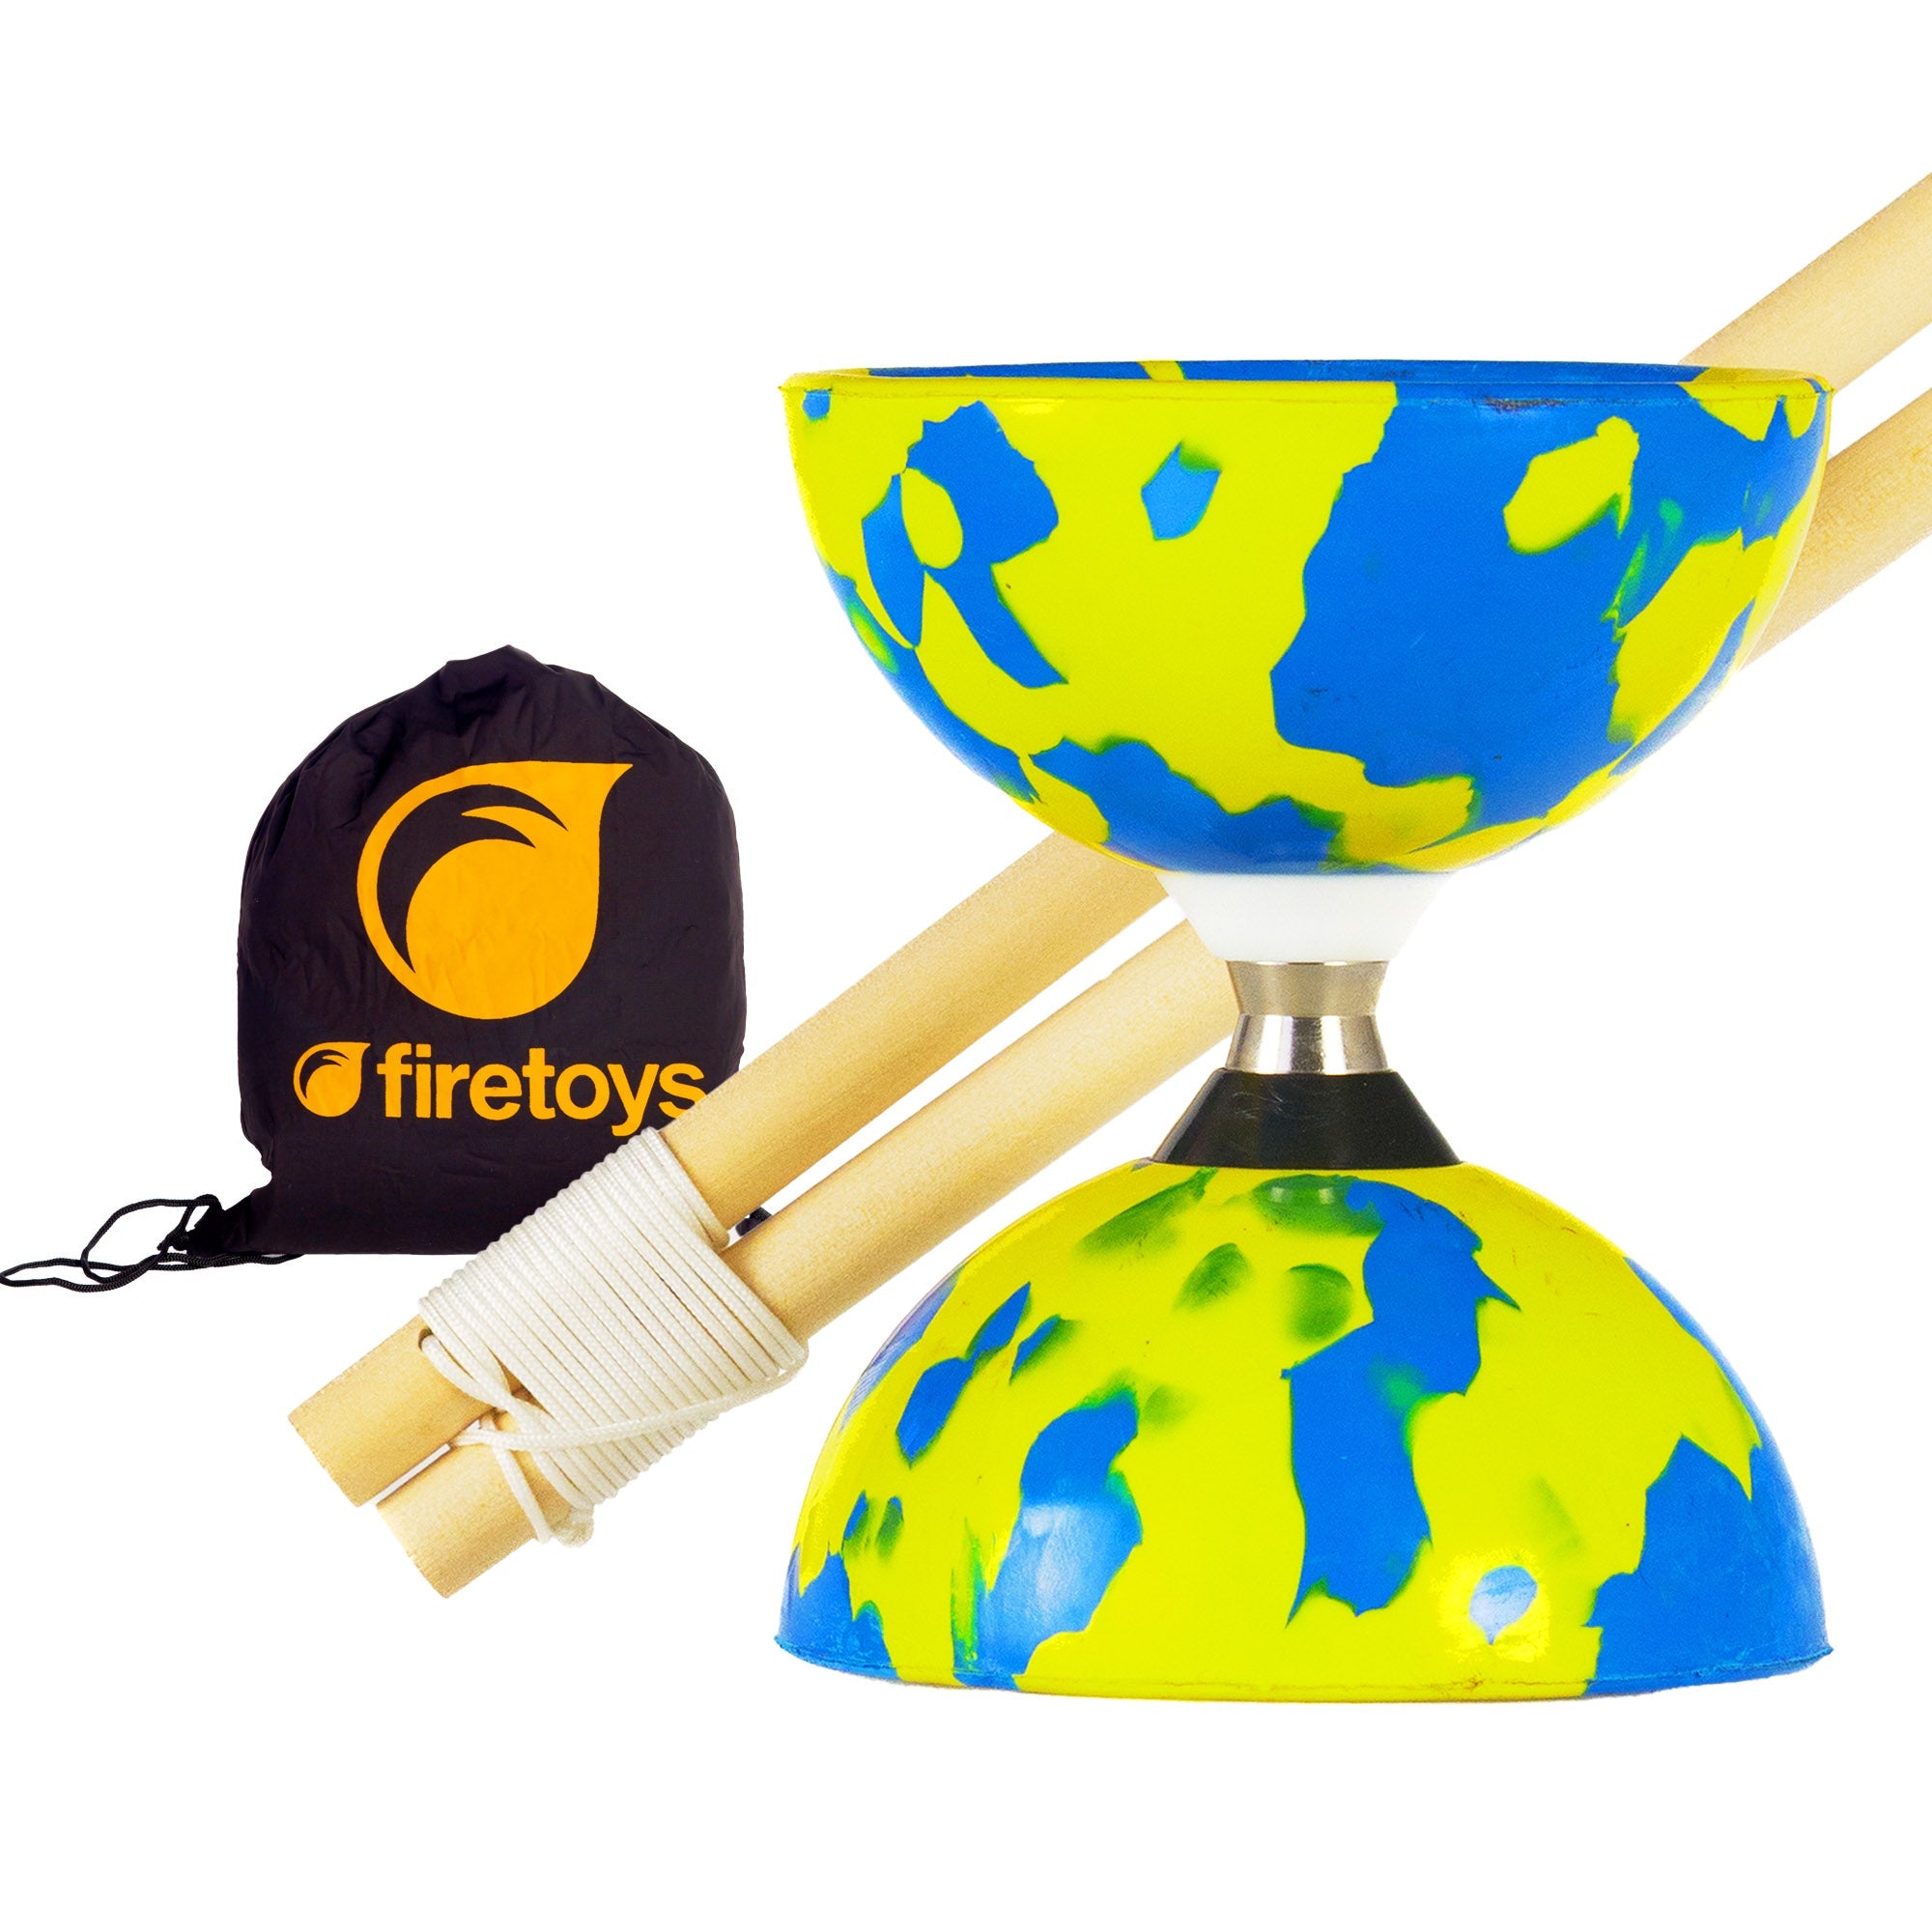 blue/yellow diabolo with wooden sticks